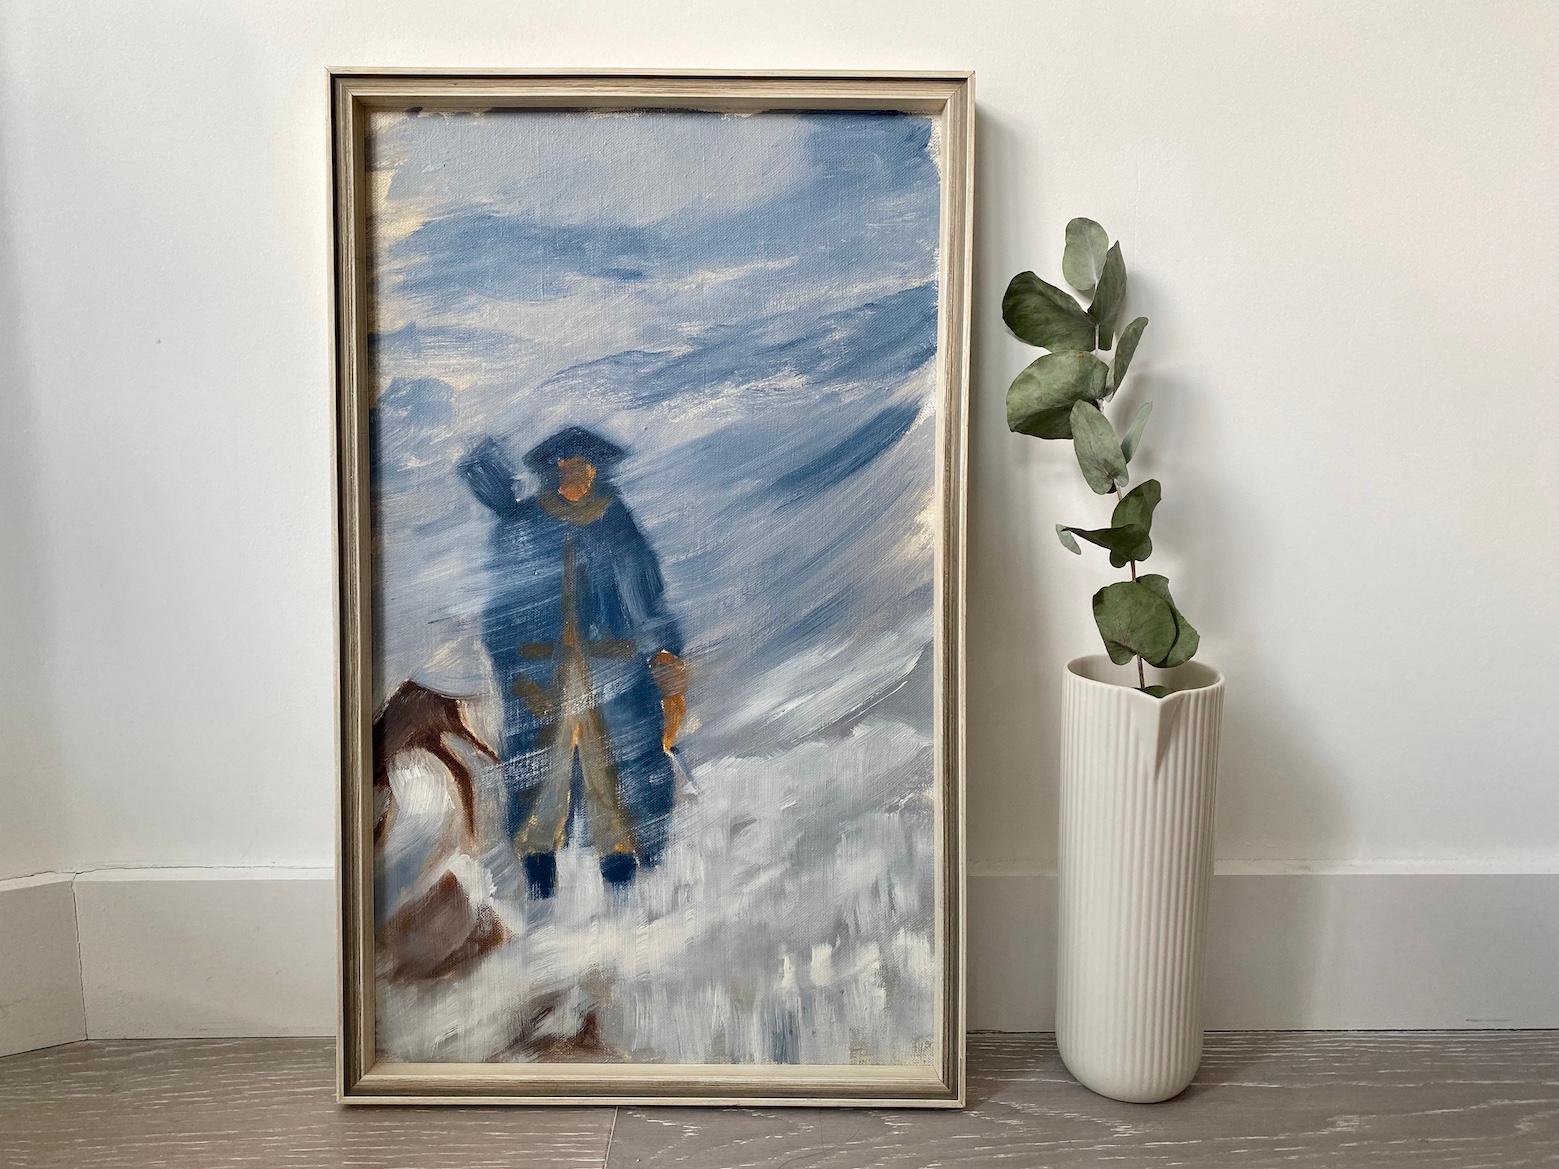 Unknown Figurative Painting - Mid Century Modern "Snow Storm", Vintage Abstract Figurative Winter Scene, Oil